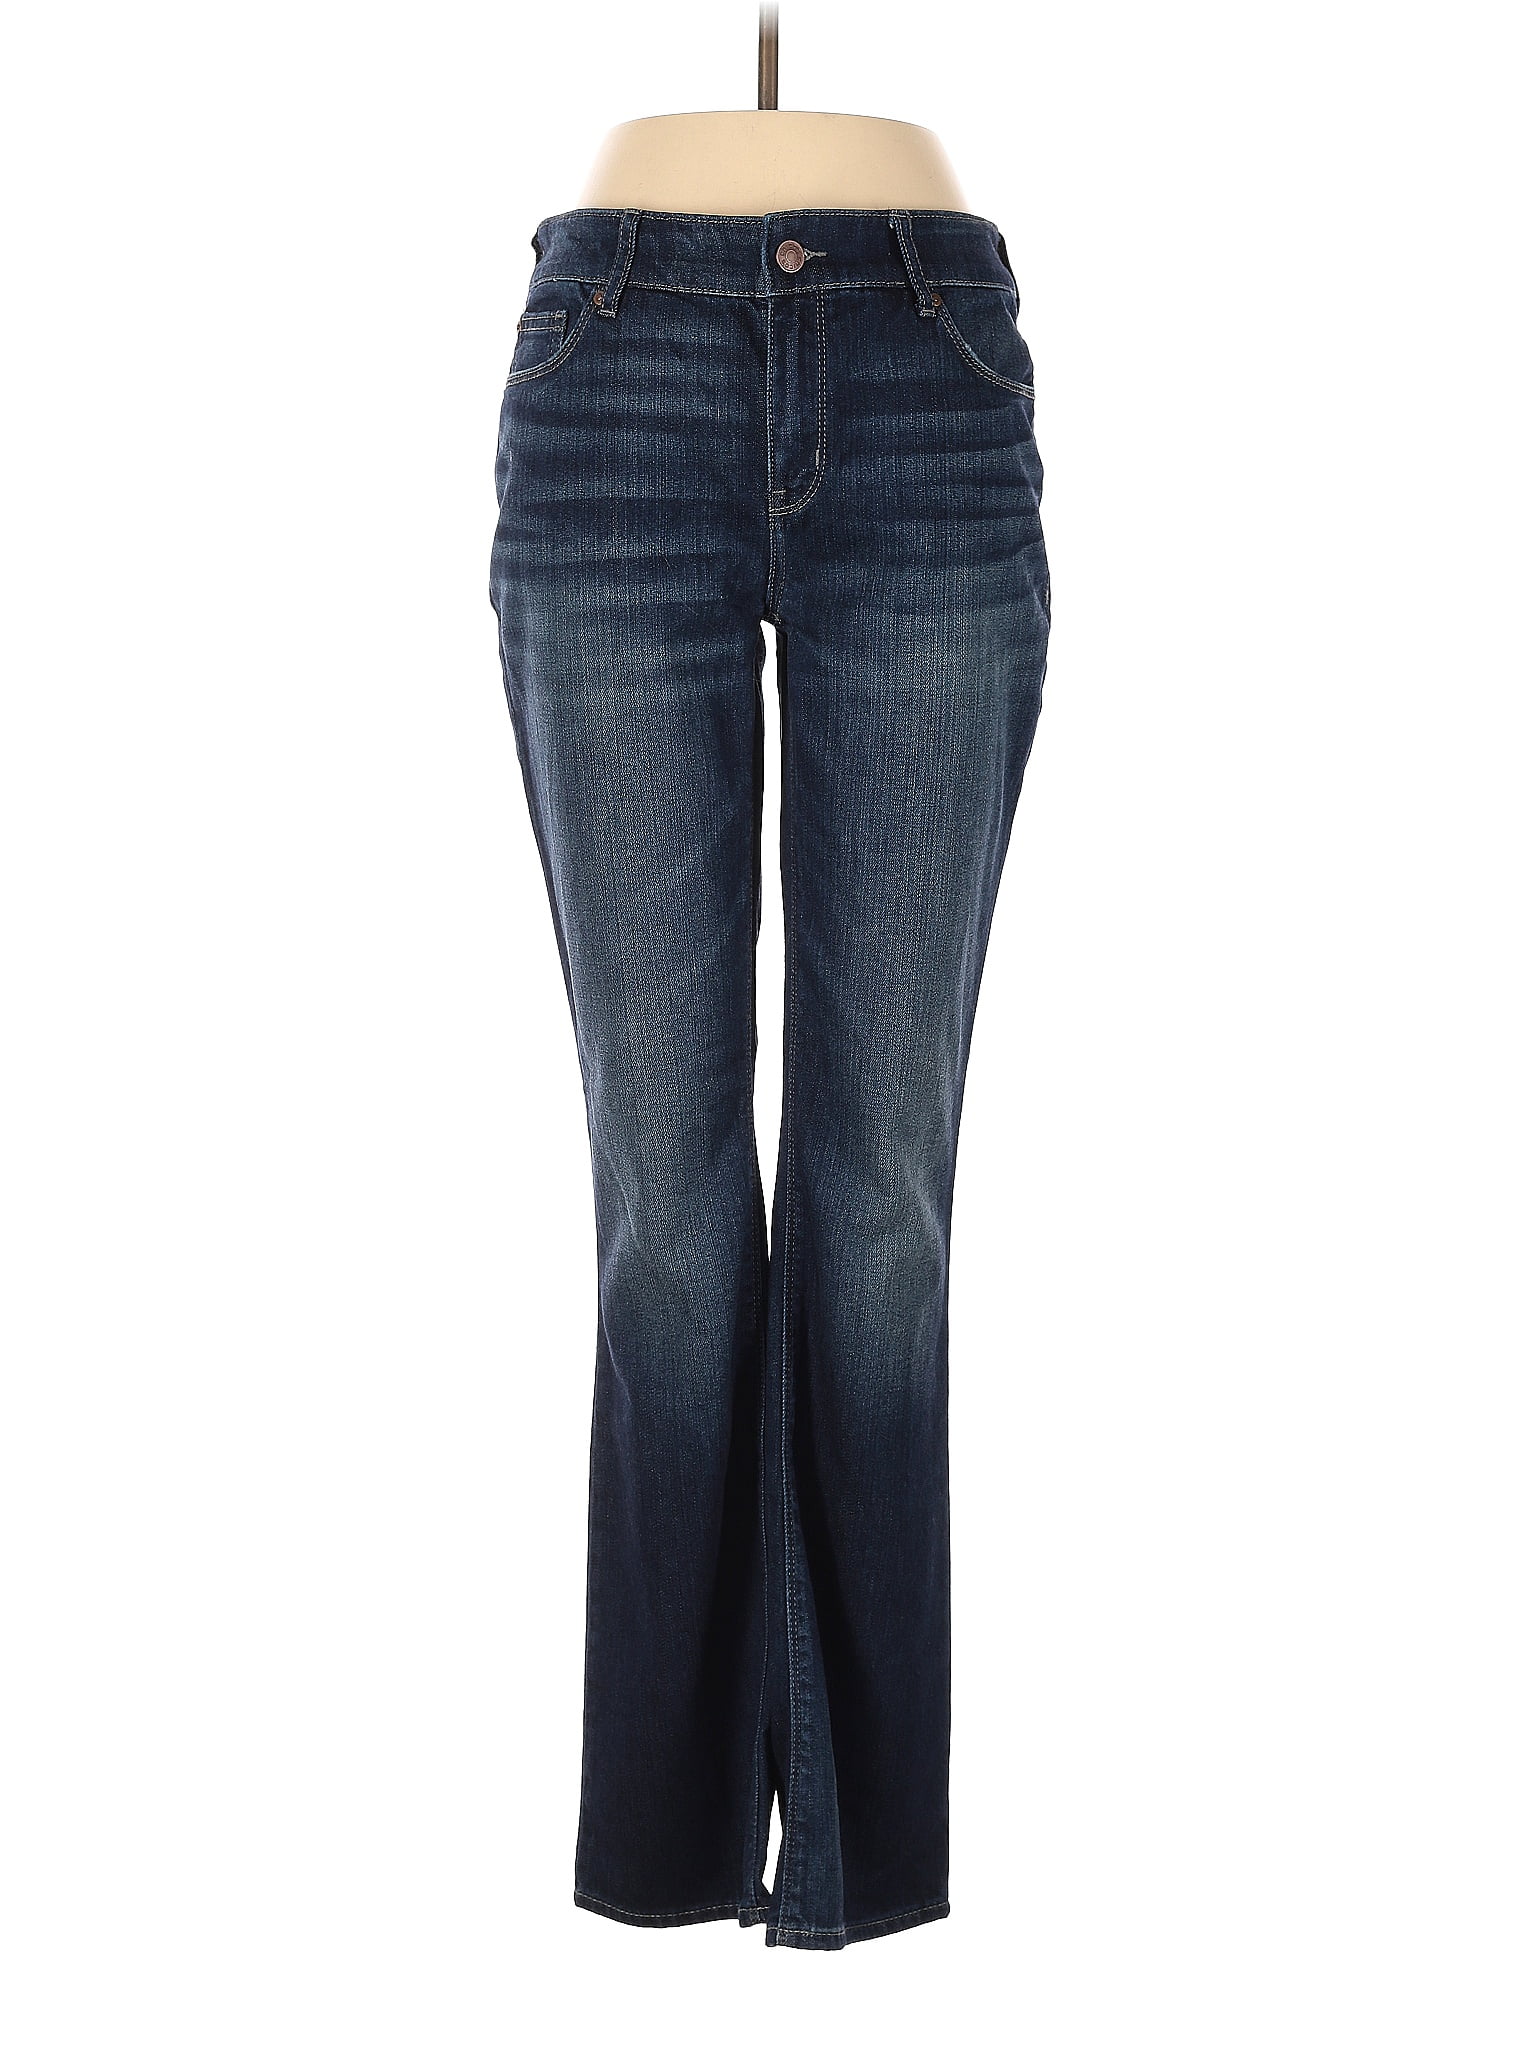 Chico's Solid Blue Jeans Size Sm (0) - 79% off | ThredUp